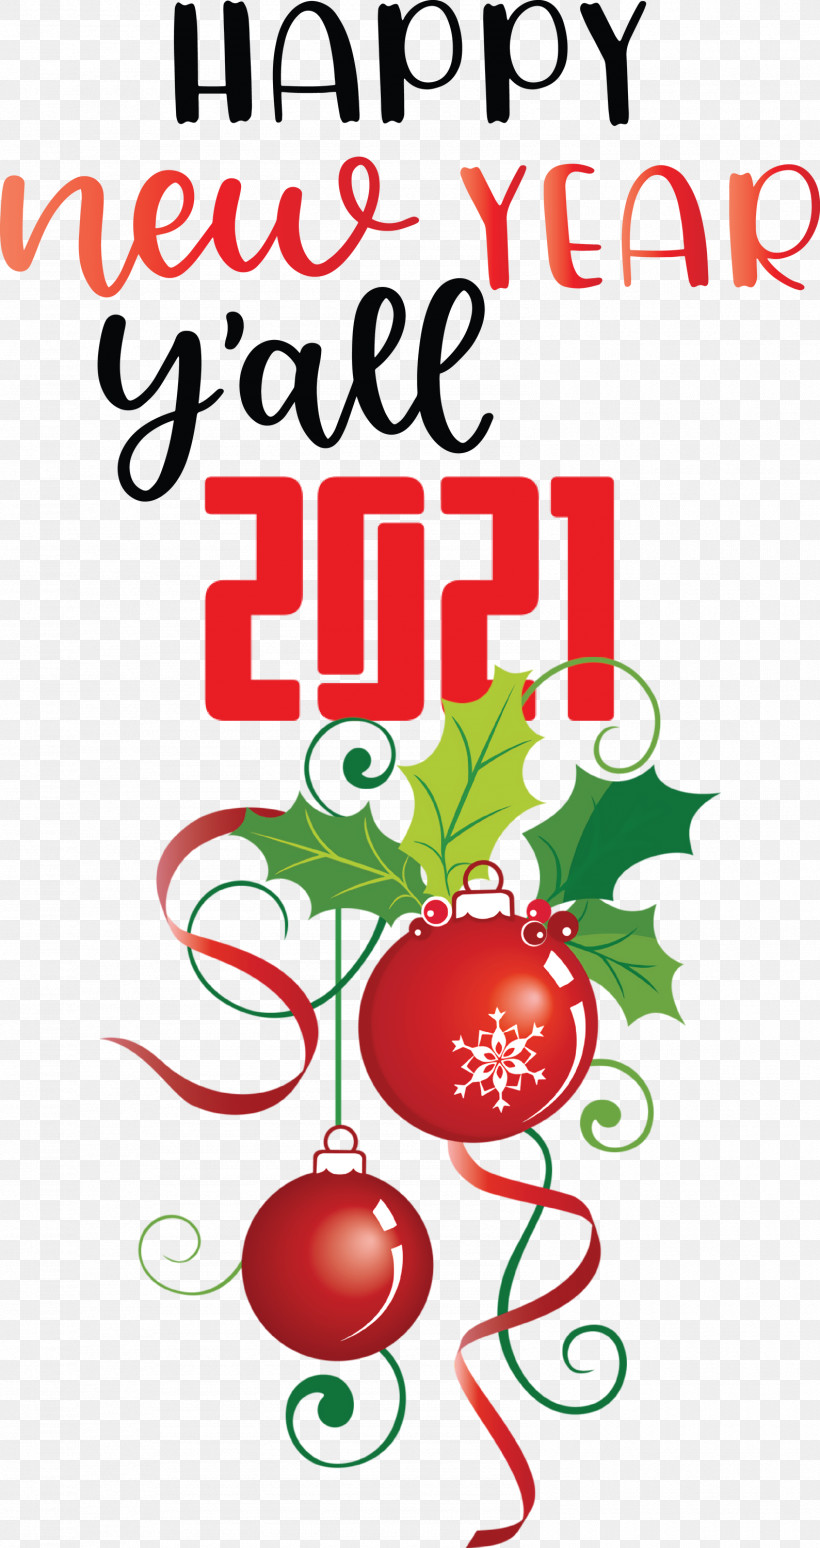 2021 Happy New Year 2021 New Year 2021 Wishes, PNG, 1589x3000px, 2021 Happy New Year, 2021 New Year, 2021 Wishes, Bauble, Christmas Day Download Free